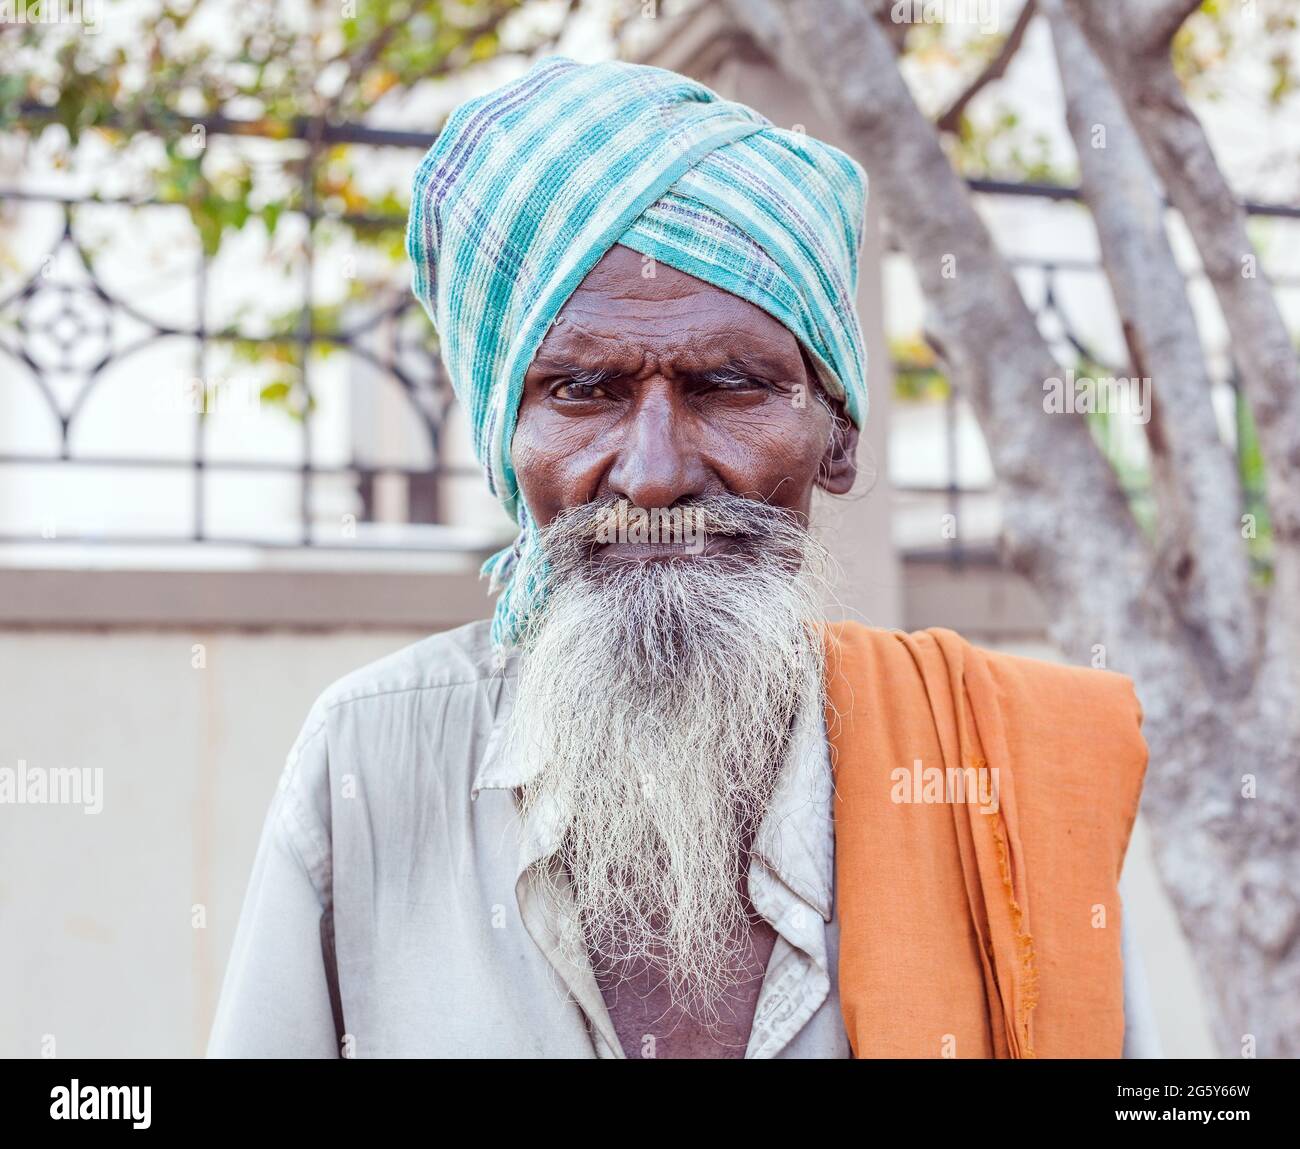 Indian holy man with turban and white bushy beard poses for photo, Trichy, Tamil Nadu, India Stock Photo